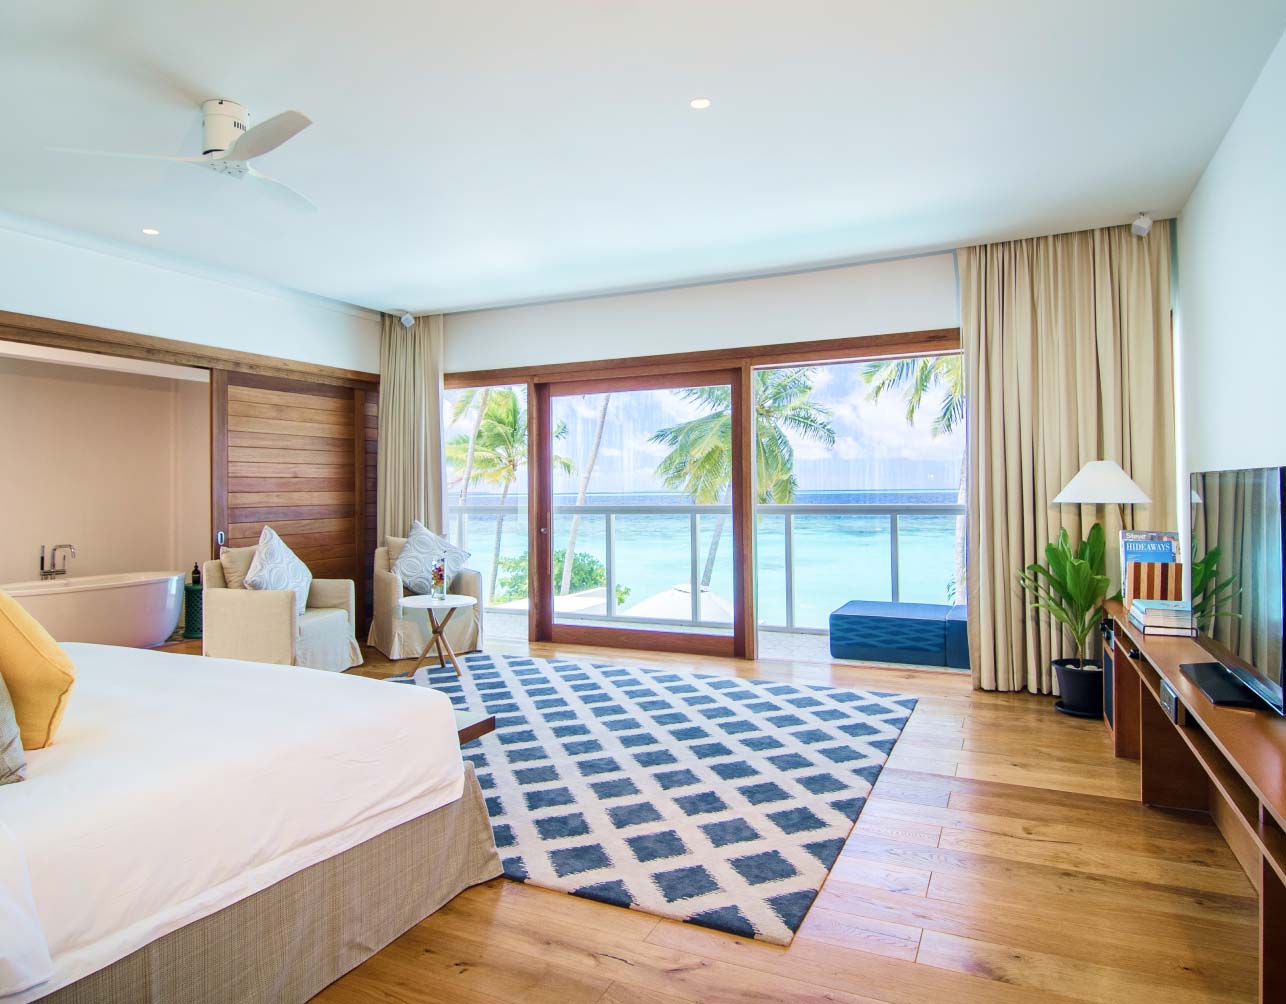 A suite with a king size bed, private balcony, & ensuite bathroom with a soaking tub in our Private Residence in the Maldives